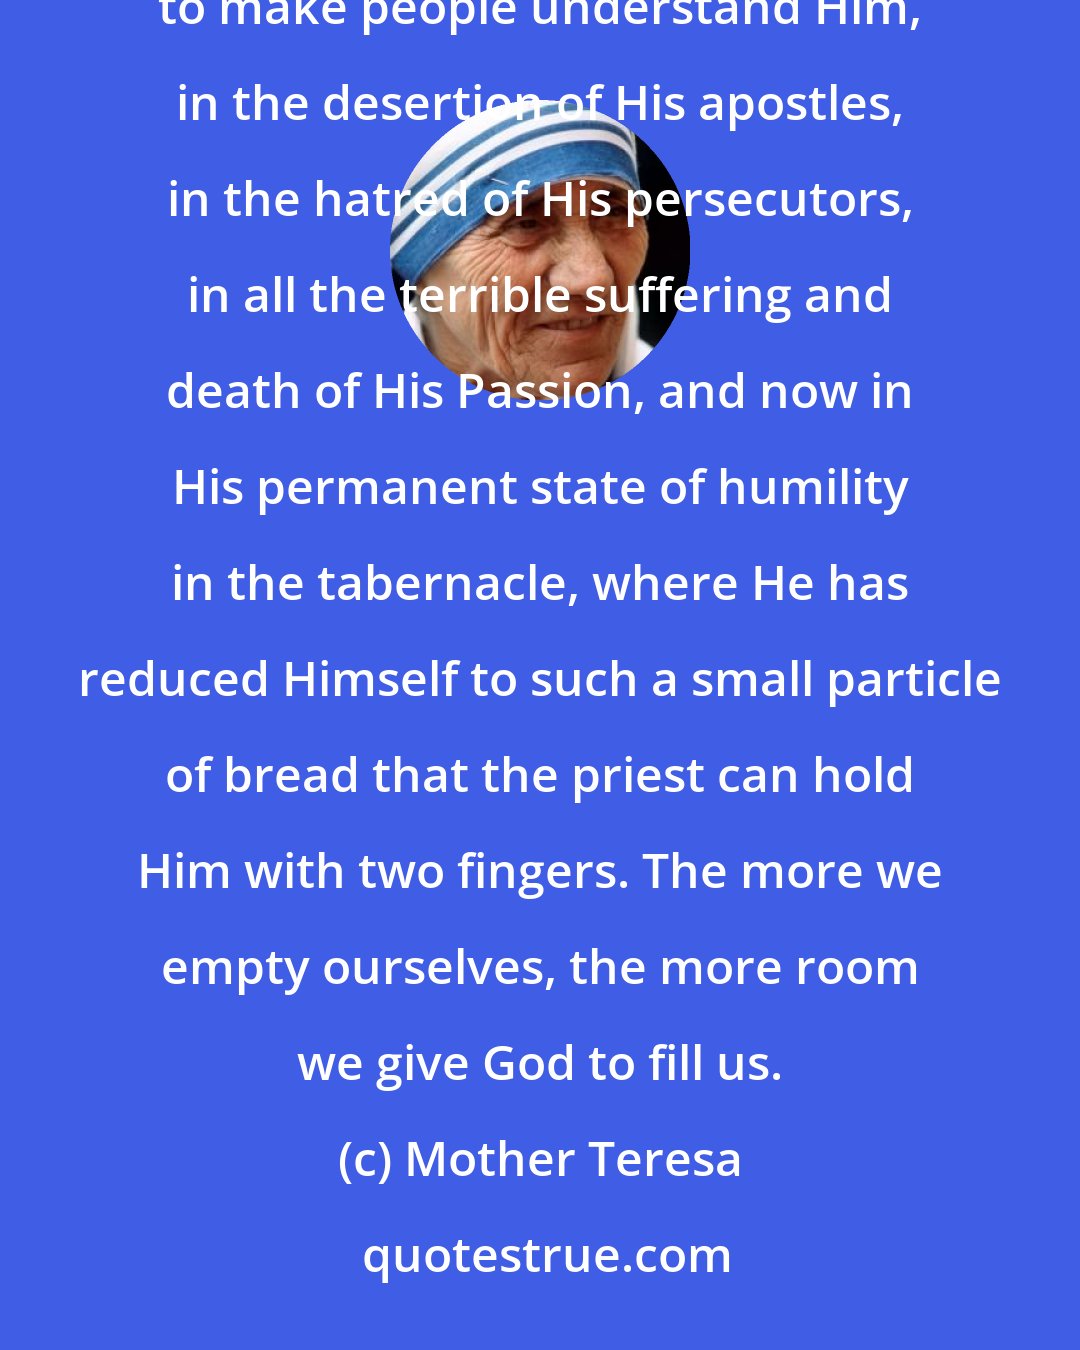 Mother Teresa: The humility of Jesus can be seen in the crib, in the exile to Egypt, in the hidden life, in the inability to make people understand Him, in the desertion of His apostles, in the hatred of His persecutors, in all the terrible suffering and death of His Passion, and now in His permanent state of humility in the tabernacle, where He has reduced Himself to such a small particle of bread that the priest can hold Him with two fingers. The more we empty ourselves, the more room we give God to fill us.